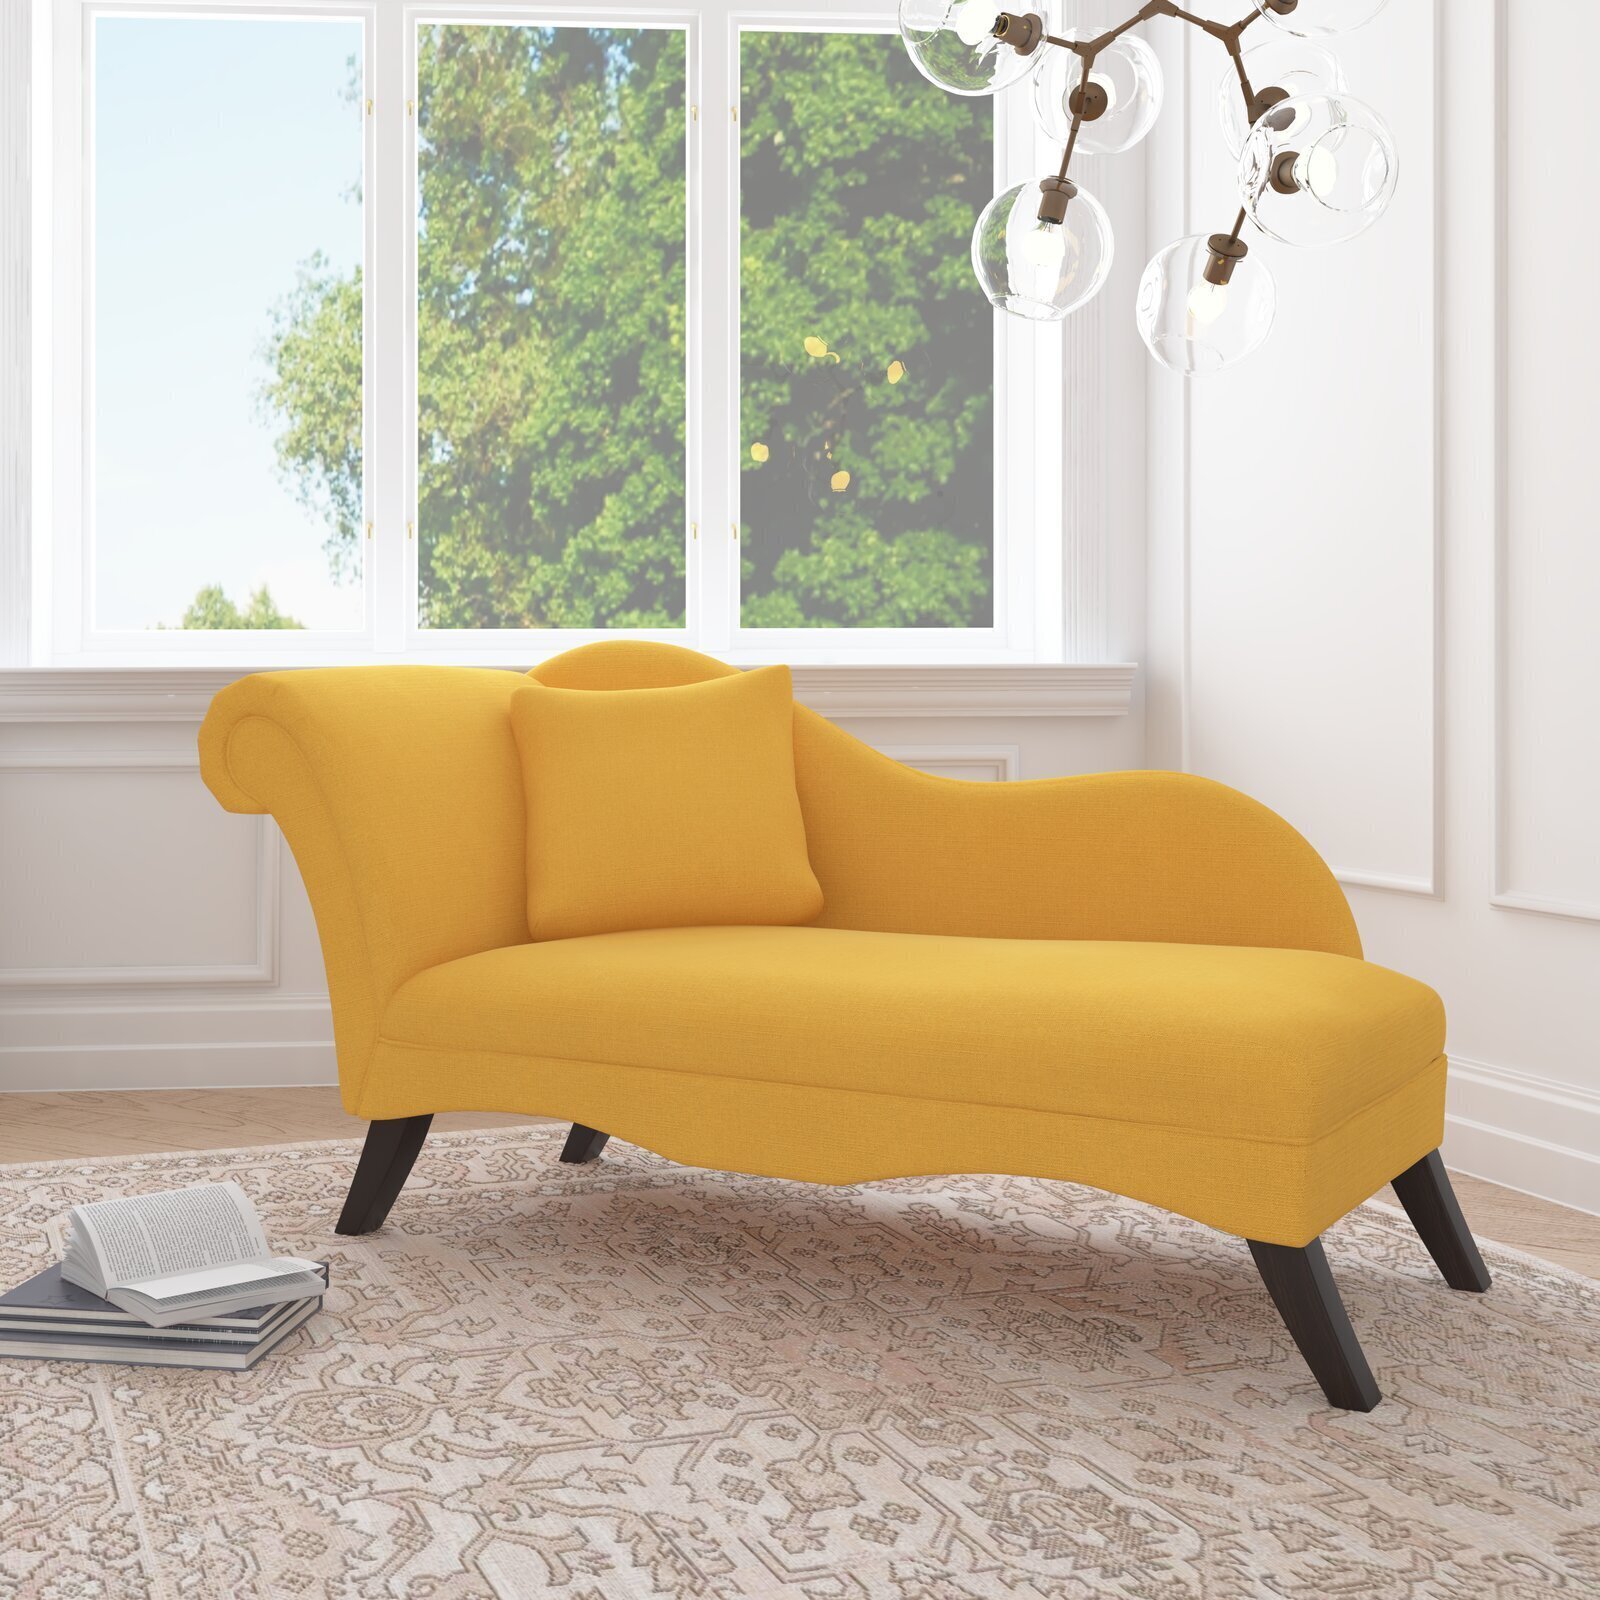 One Arm Leisure Chaise lounge